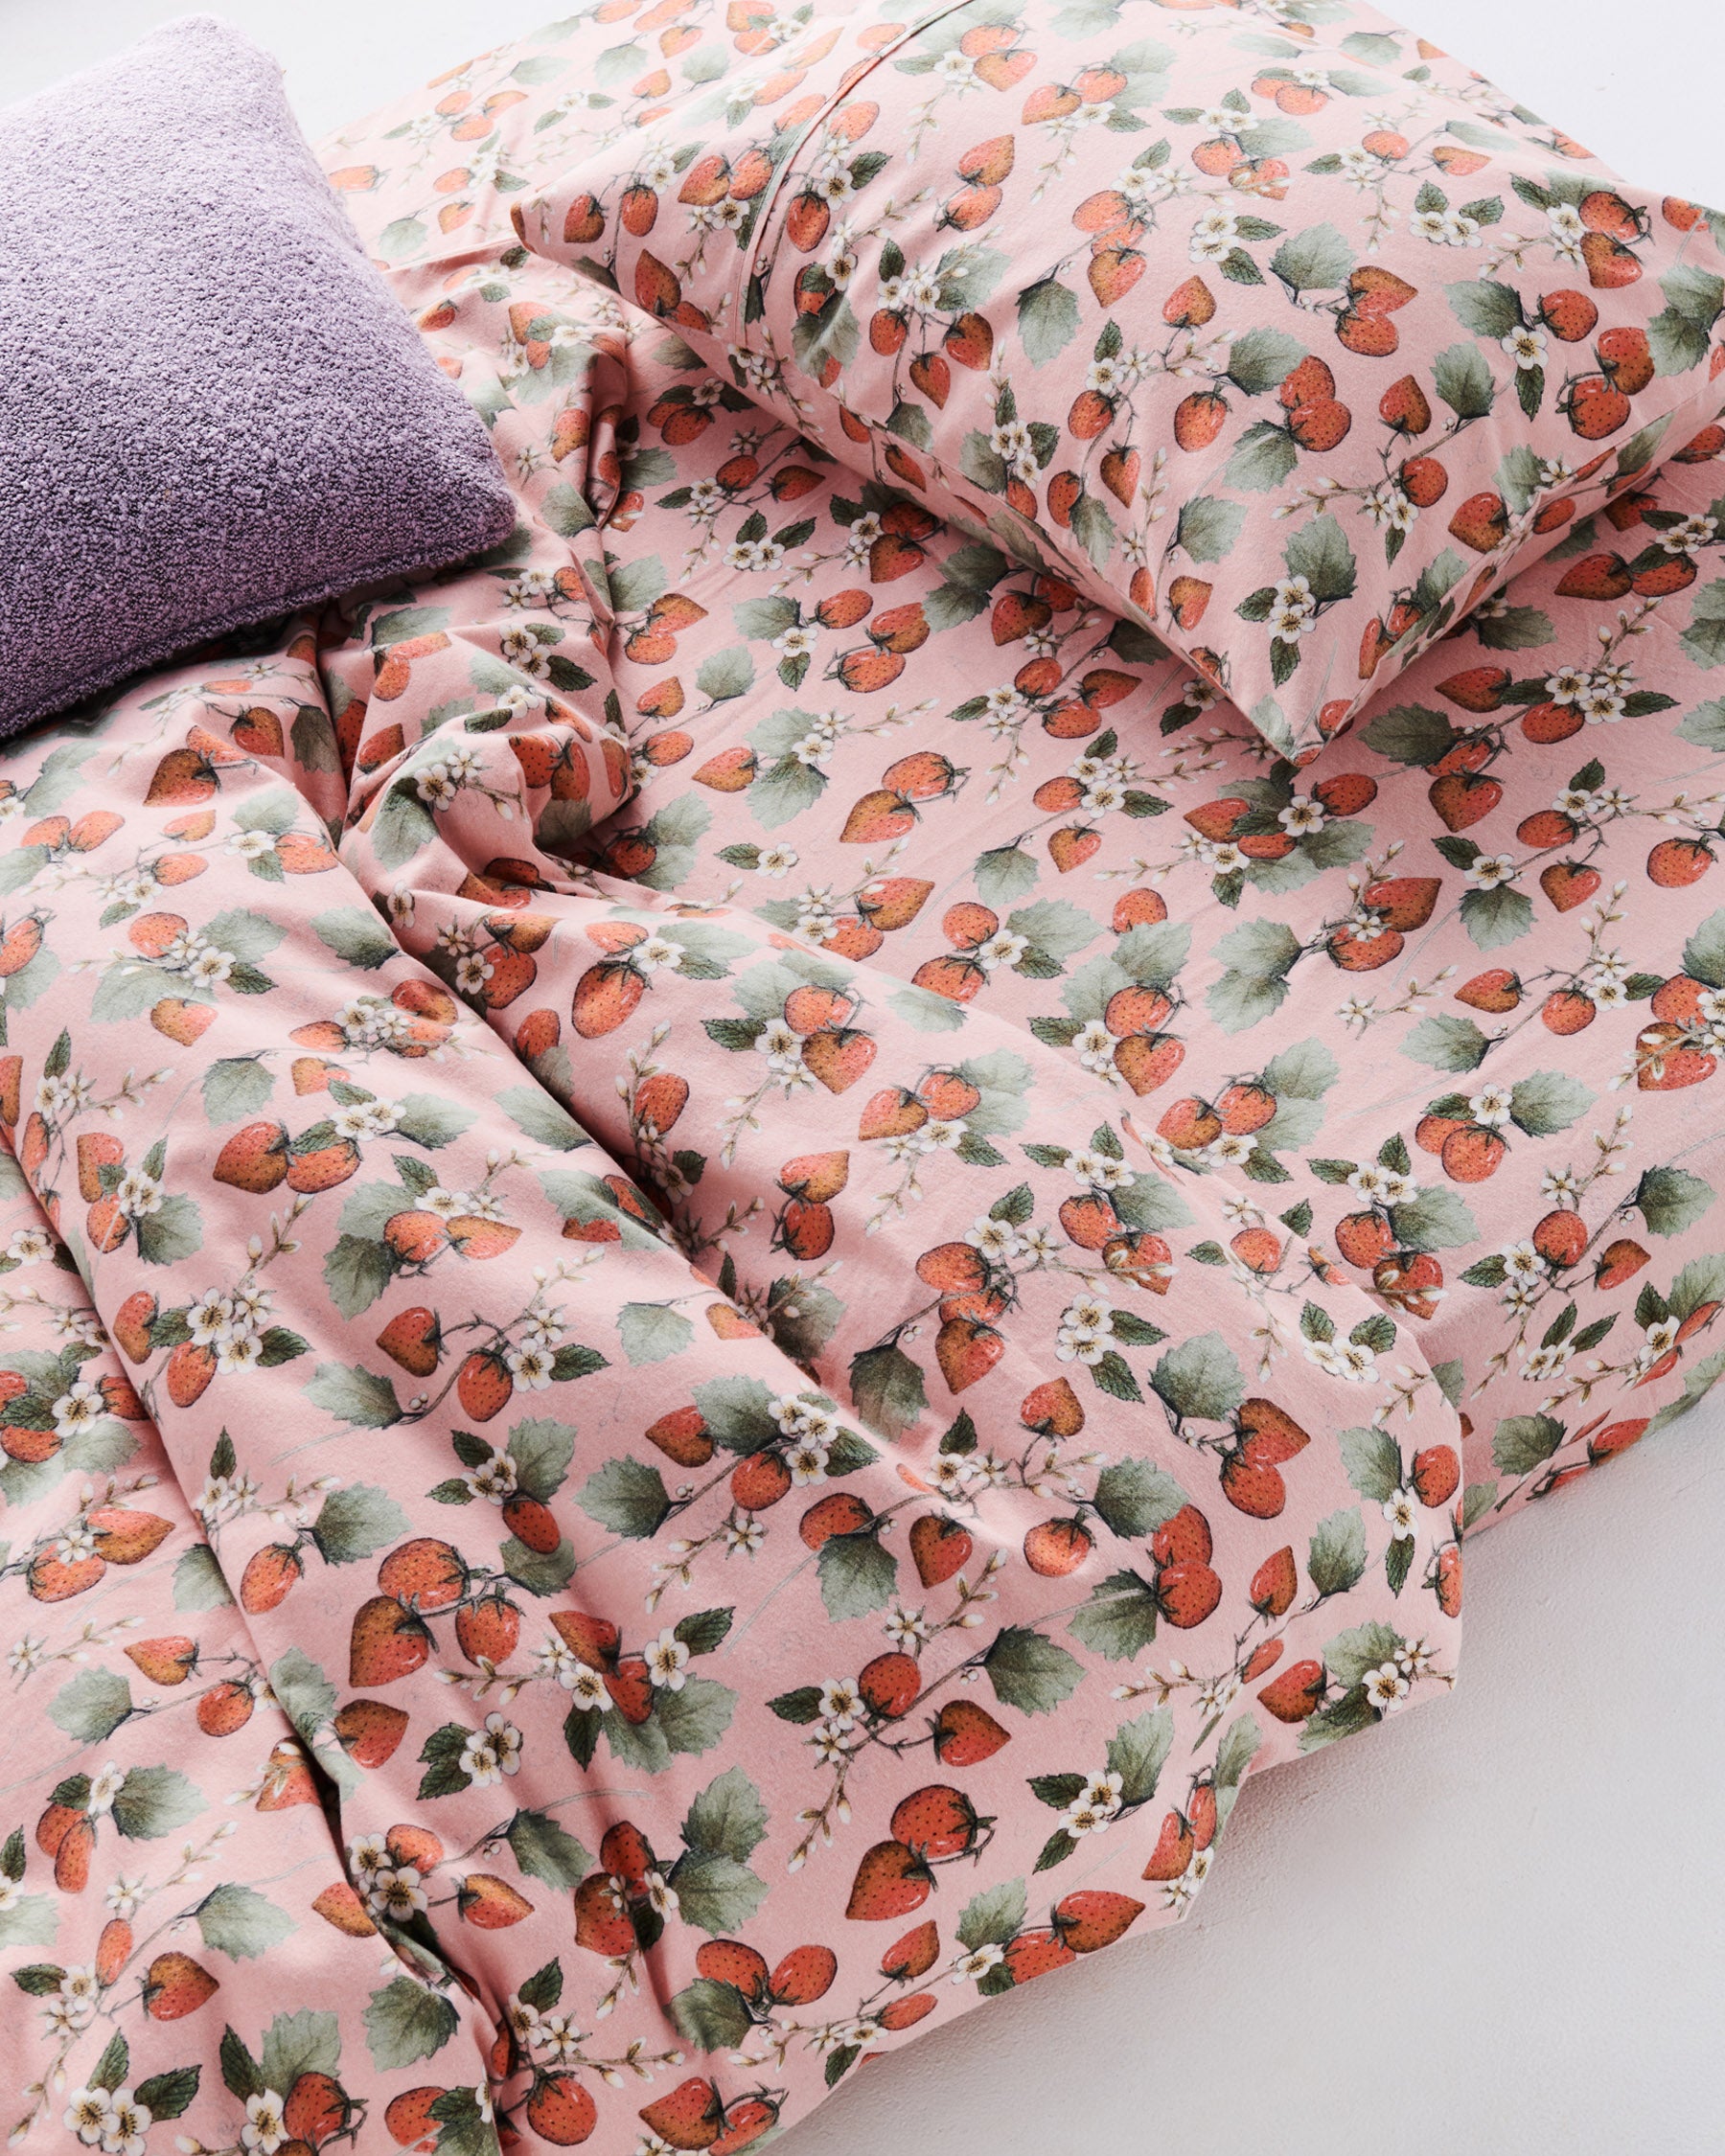 Flannelette Pillowcase - The Patch